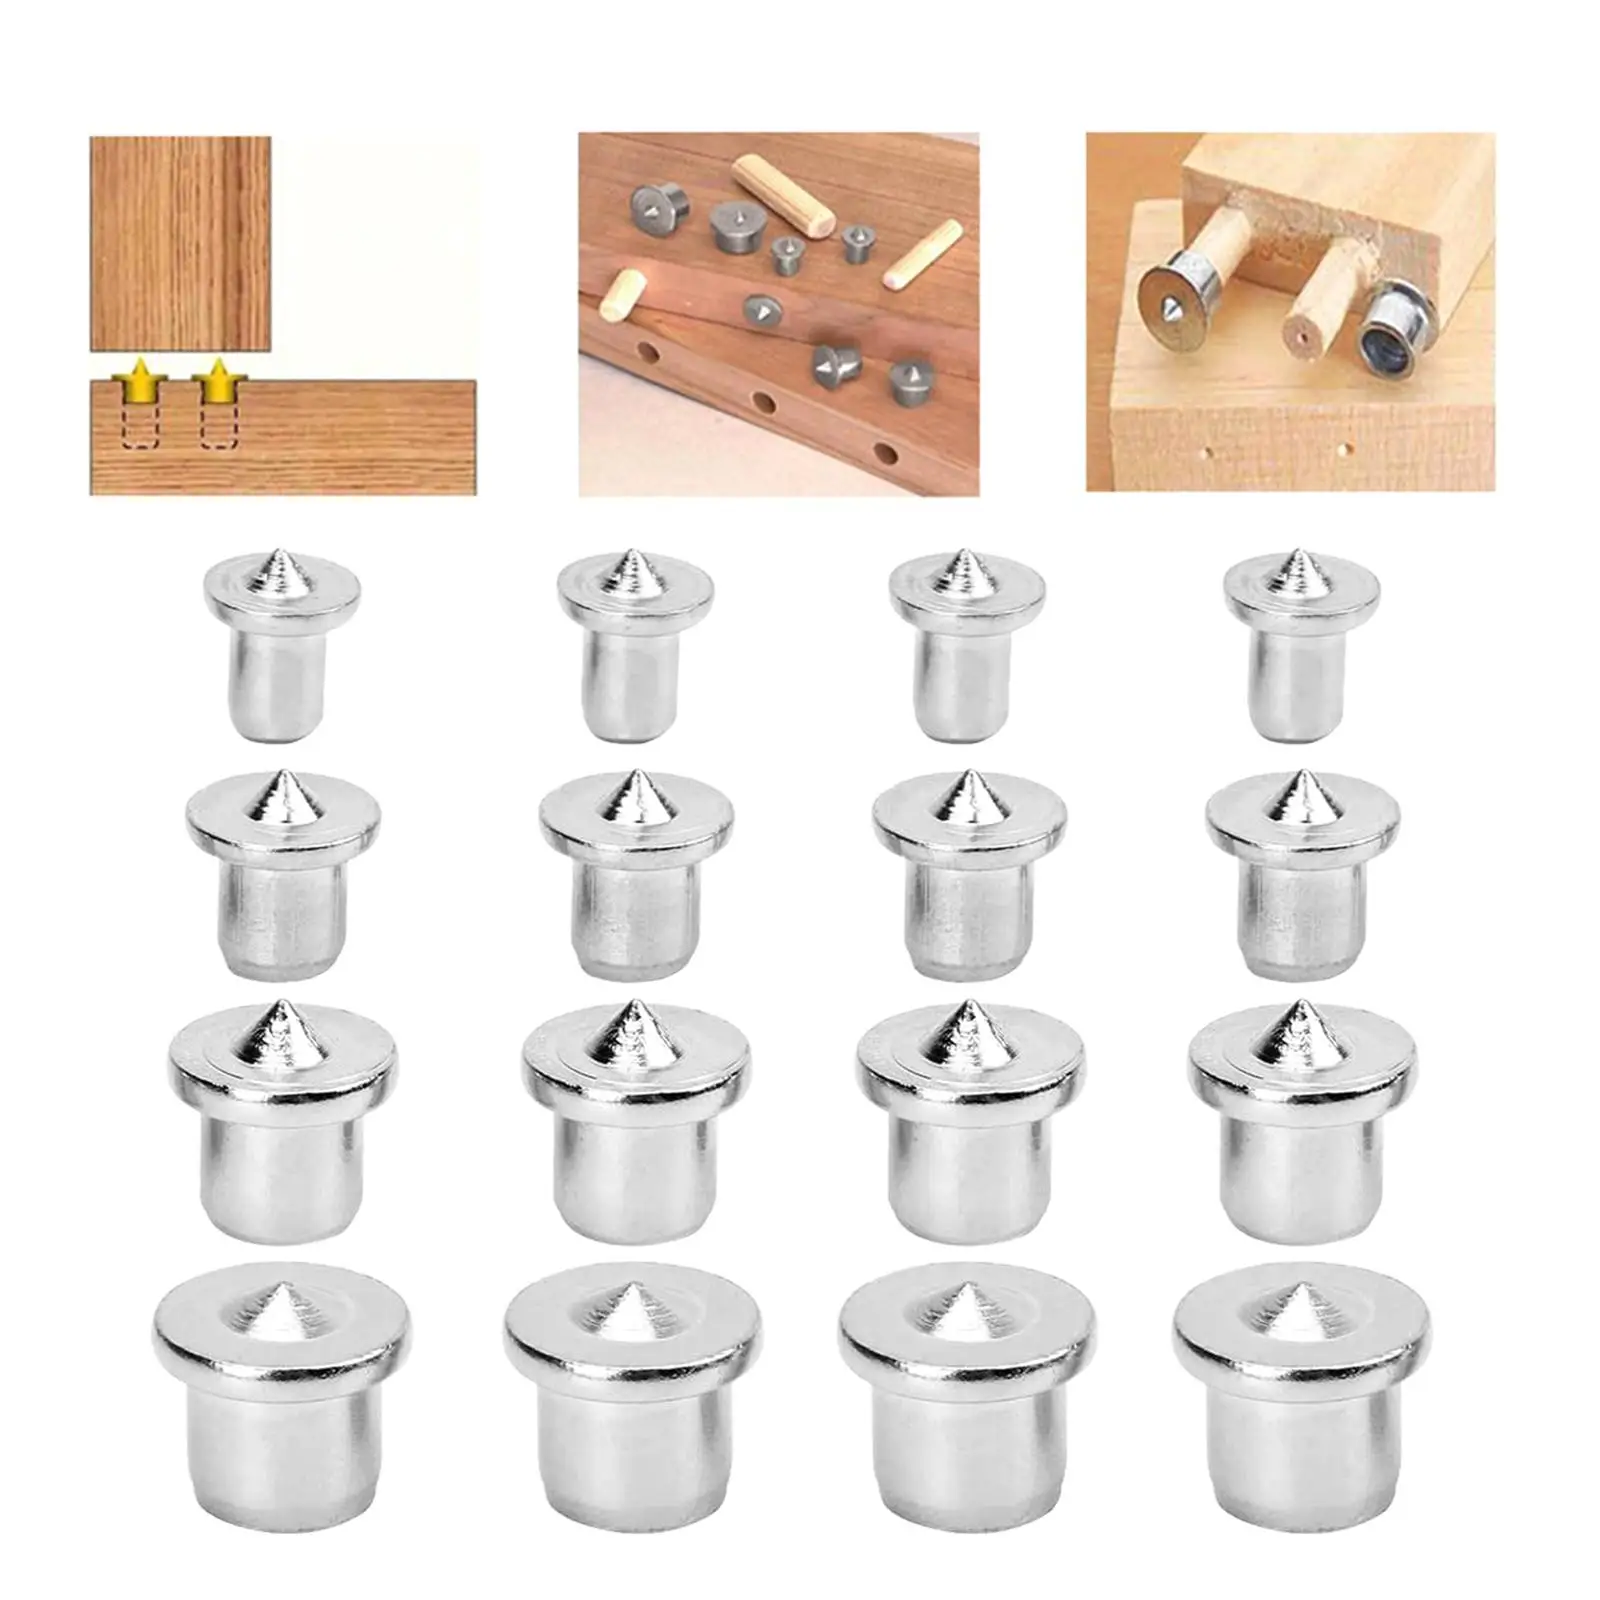 Center Dowel Pins Wooden Centering Drill Hole Tool Center Hole Positioning